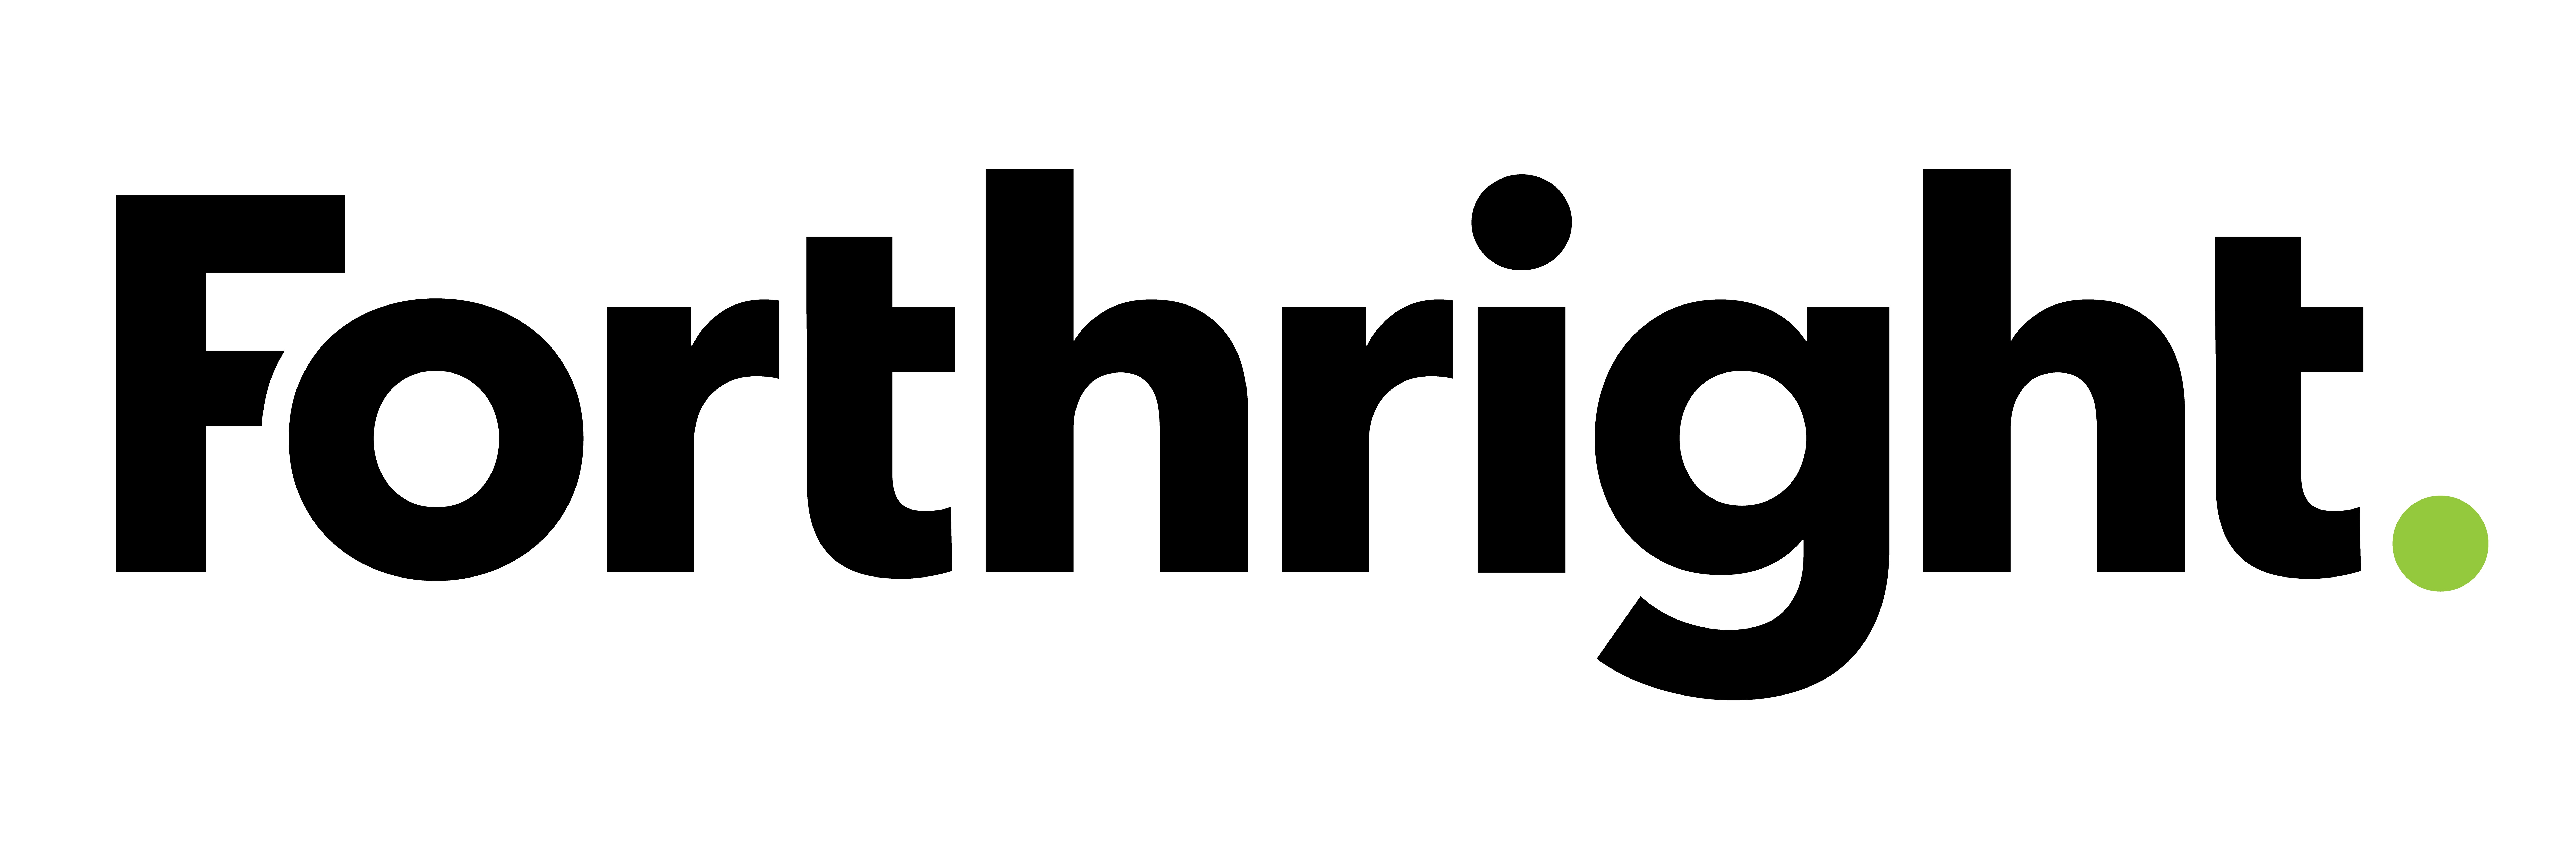 Forthright Technology Partners Logo